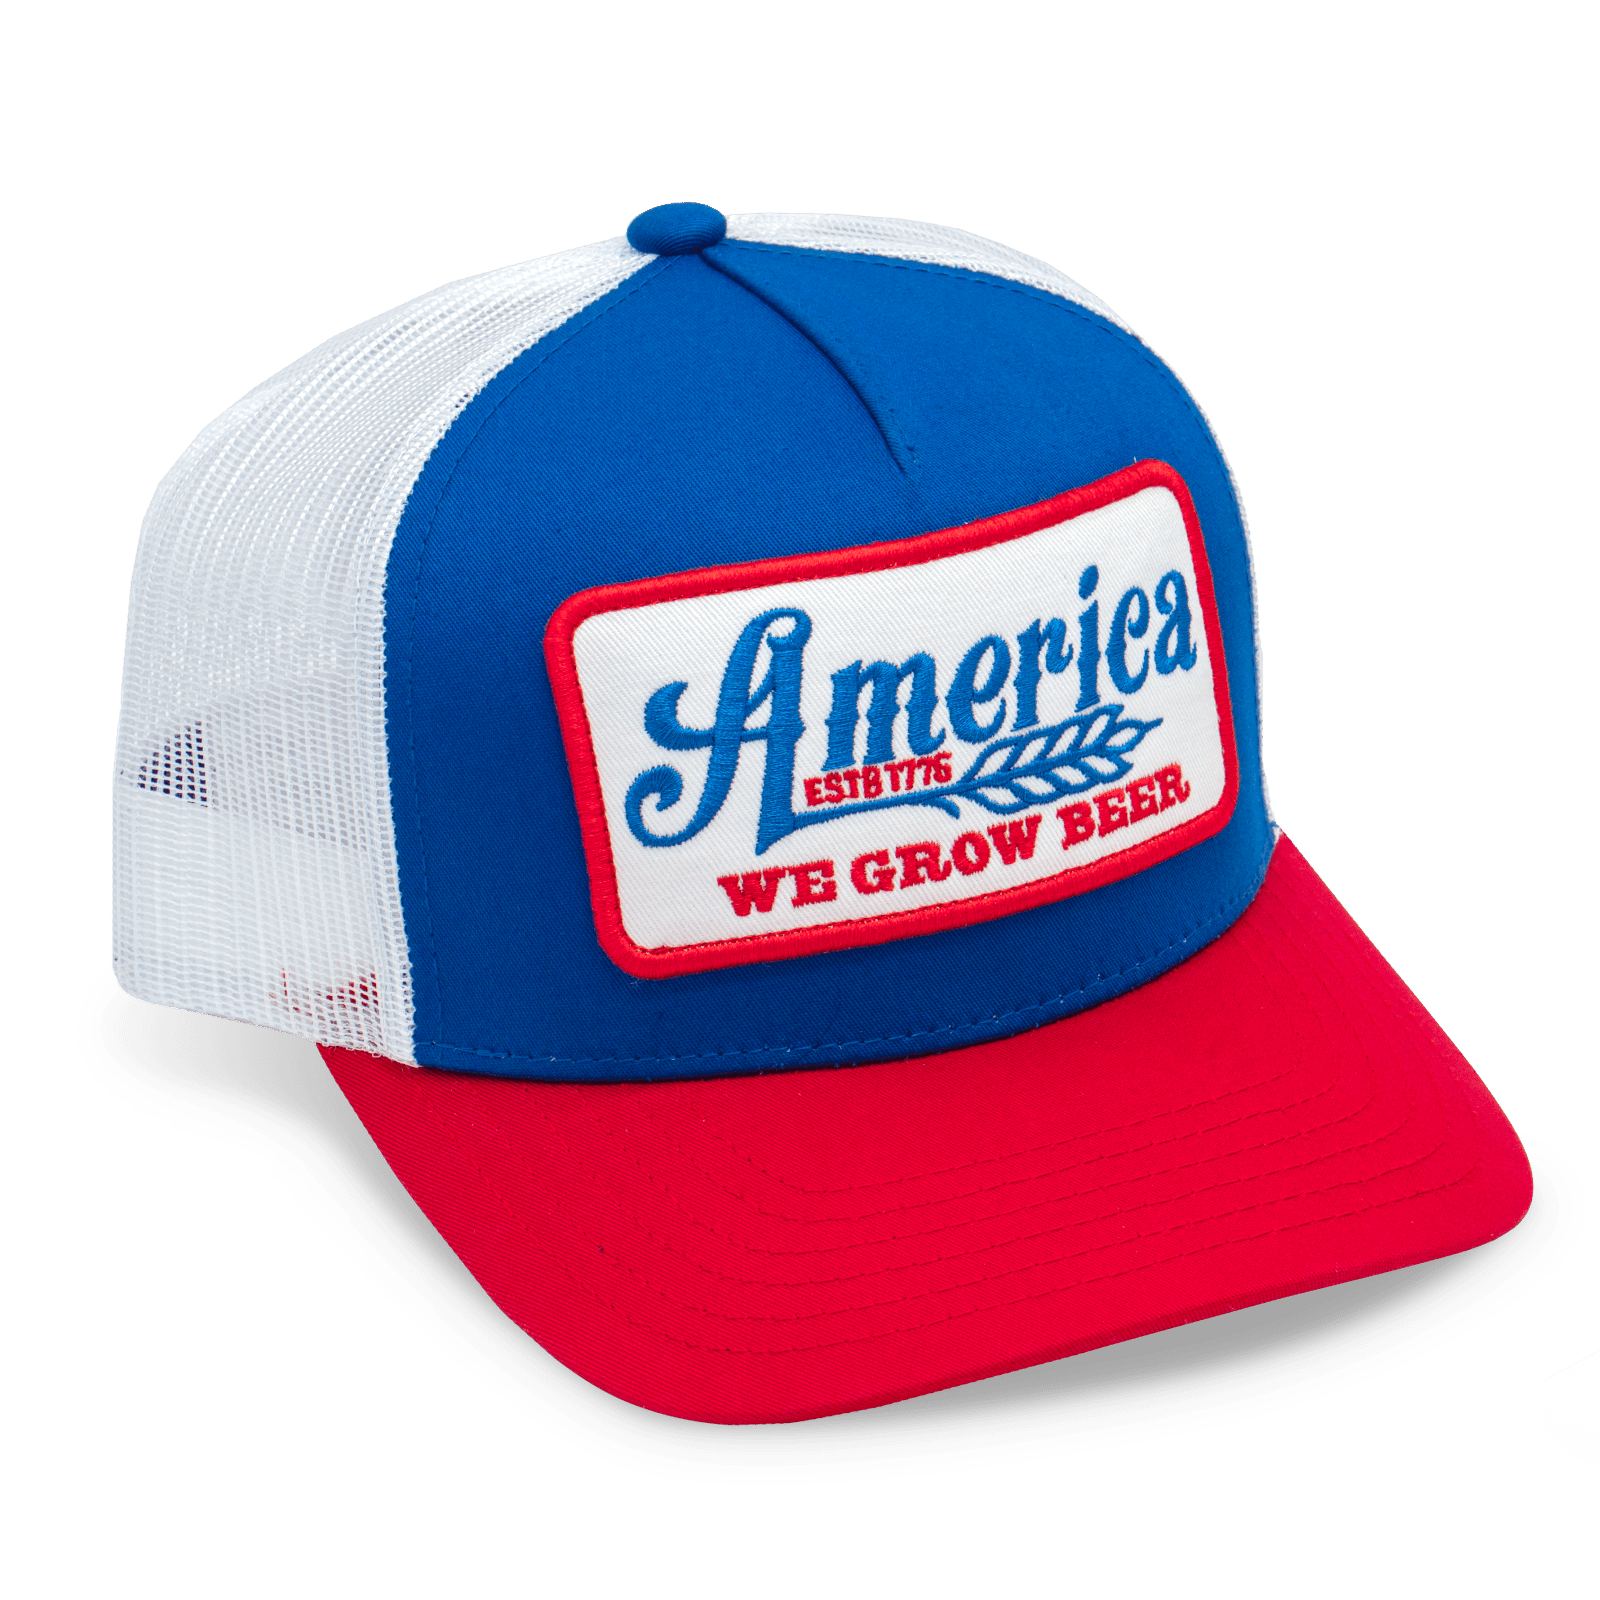 Rural Cloth Hats We Grow Beer Hat-Red, White and Blue